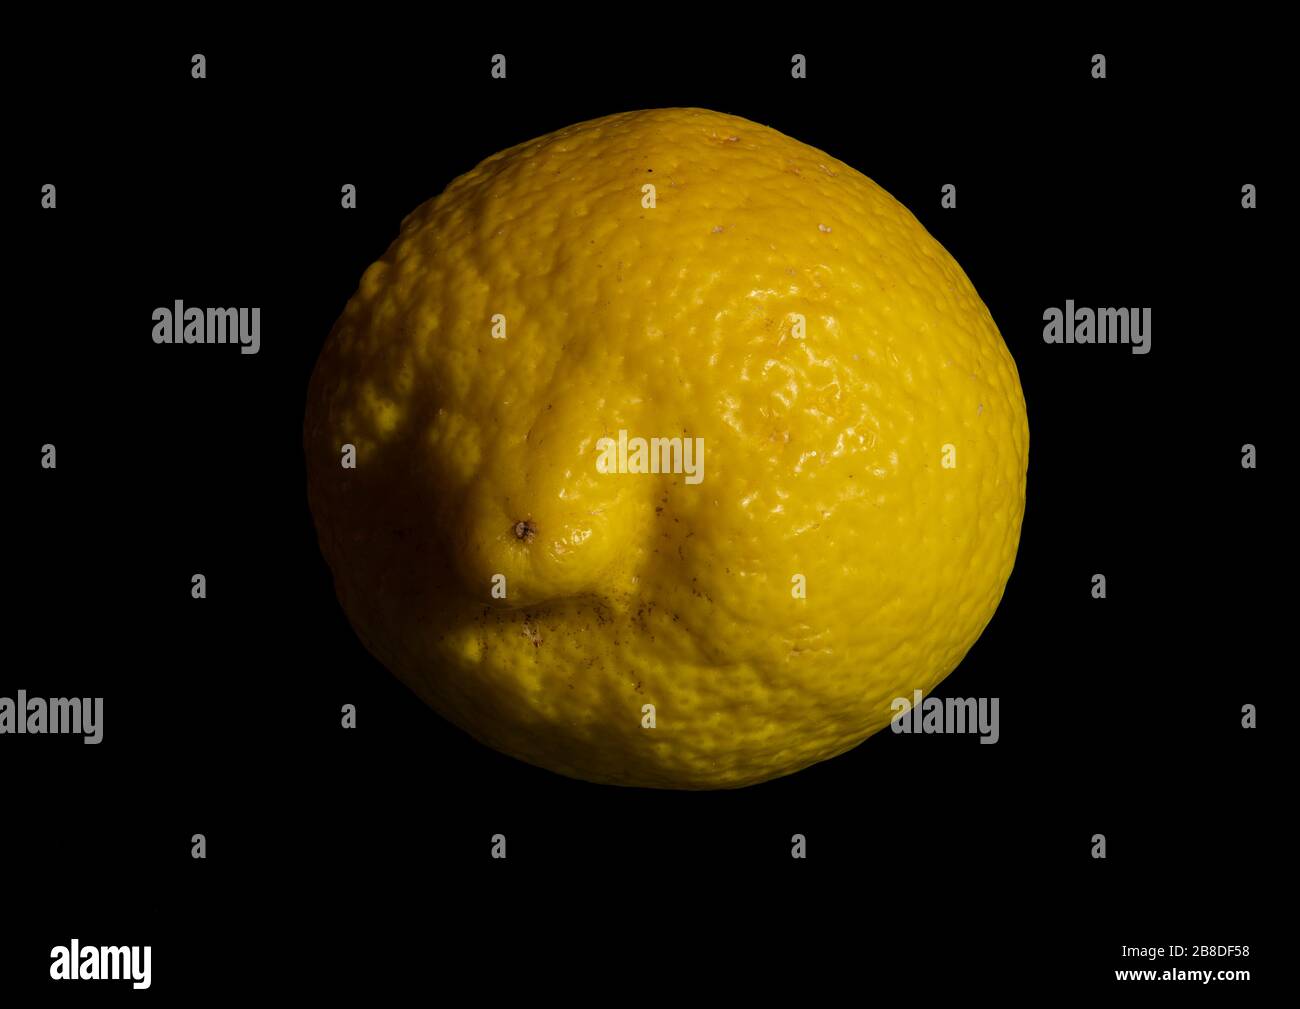 Close up image of an organic lemon using a focus stacking technique that renders the subjects in sharp focus from front to back Stock Photo